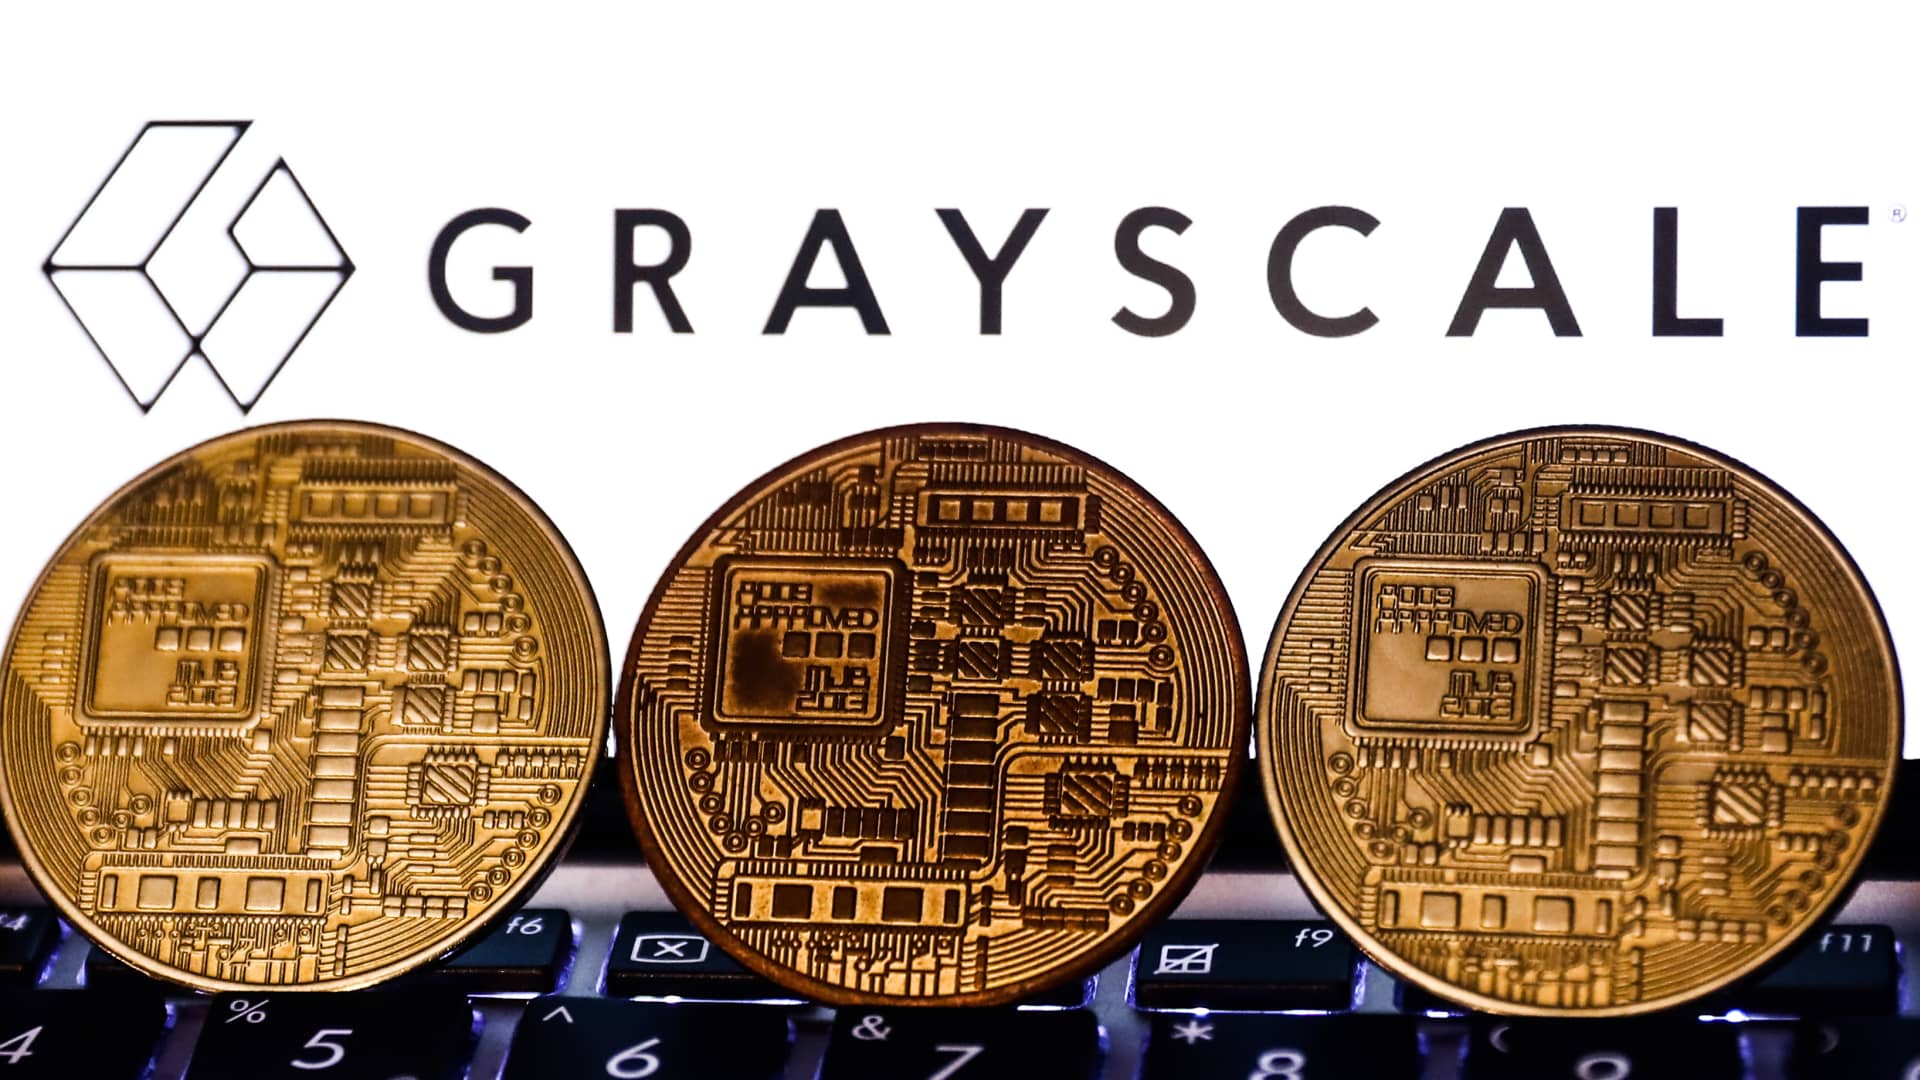 Grayscale refuses to share proof of reserves due to 'security concerns' as shares trade at a 45% discount to bitcoin